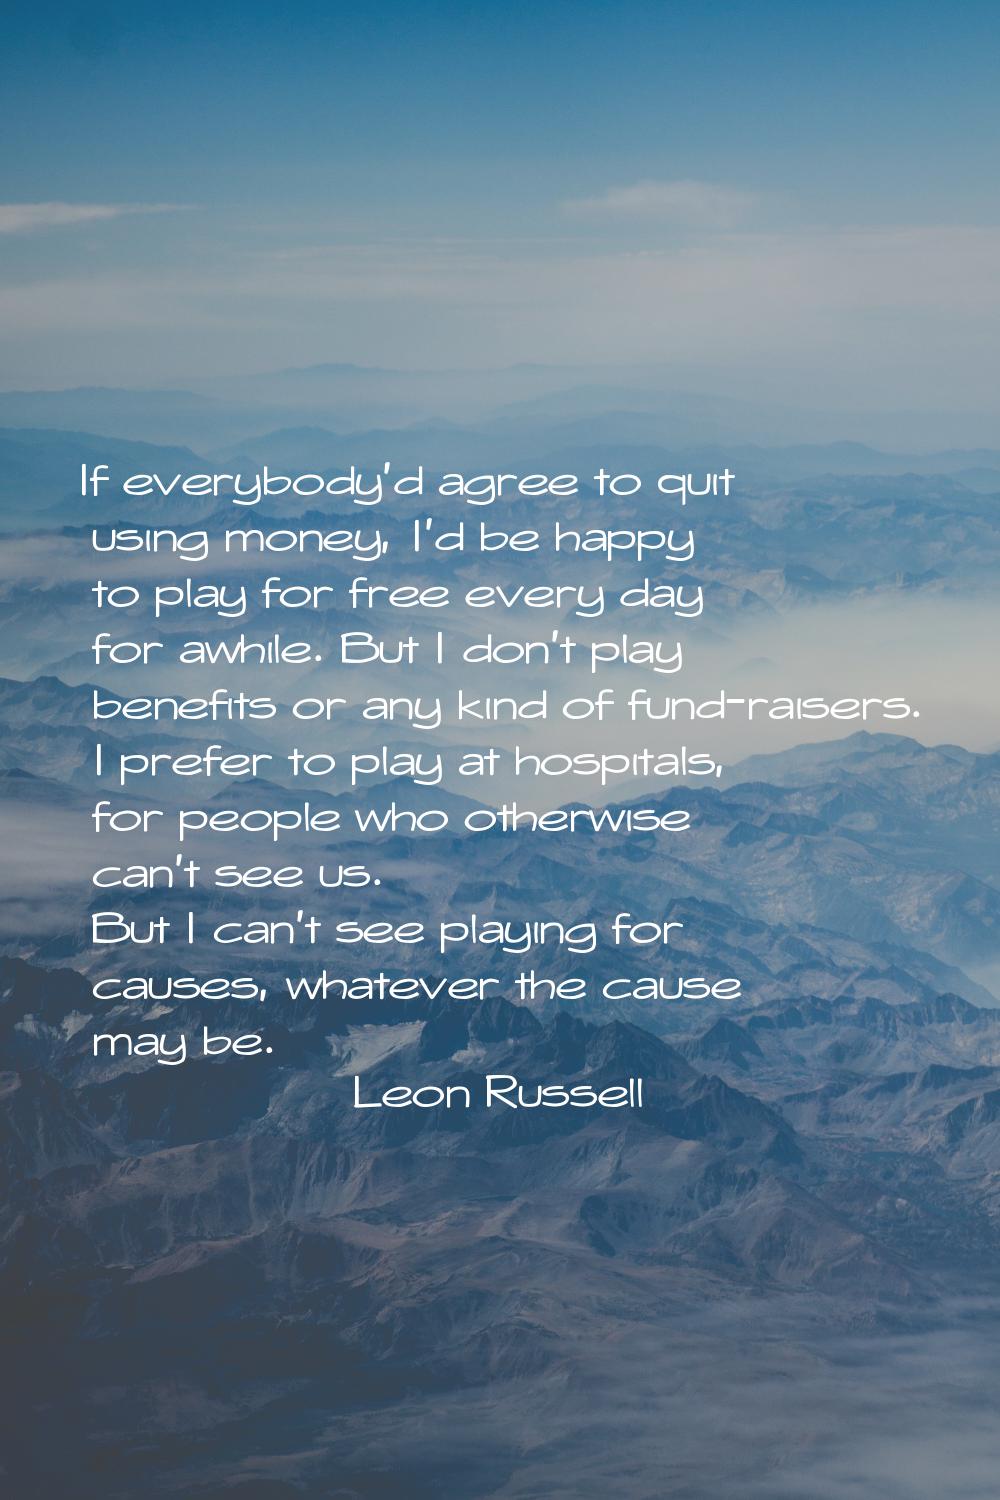 If everybody'd agree to quit using money, I'd be happy to play for free every day for awhile. But I